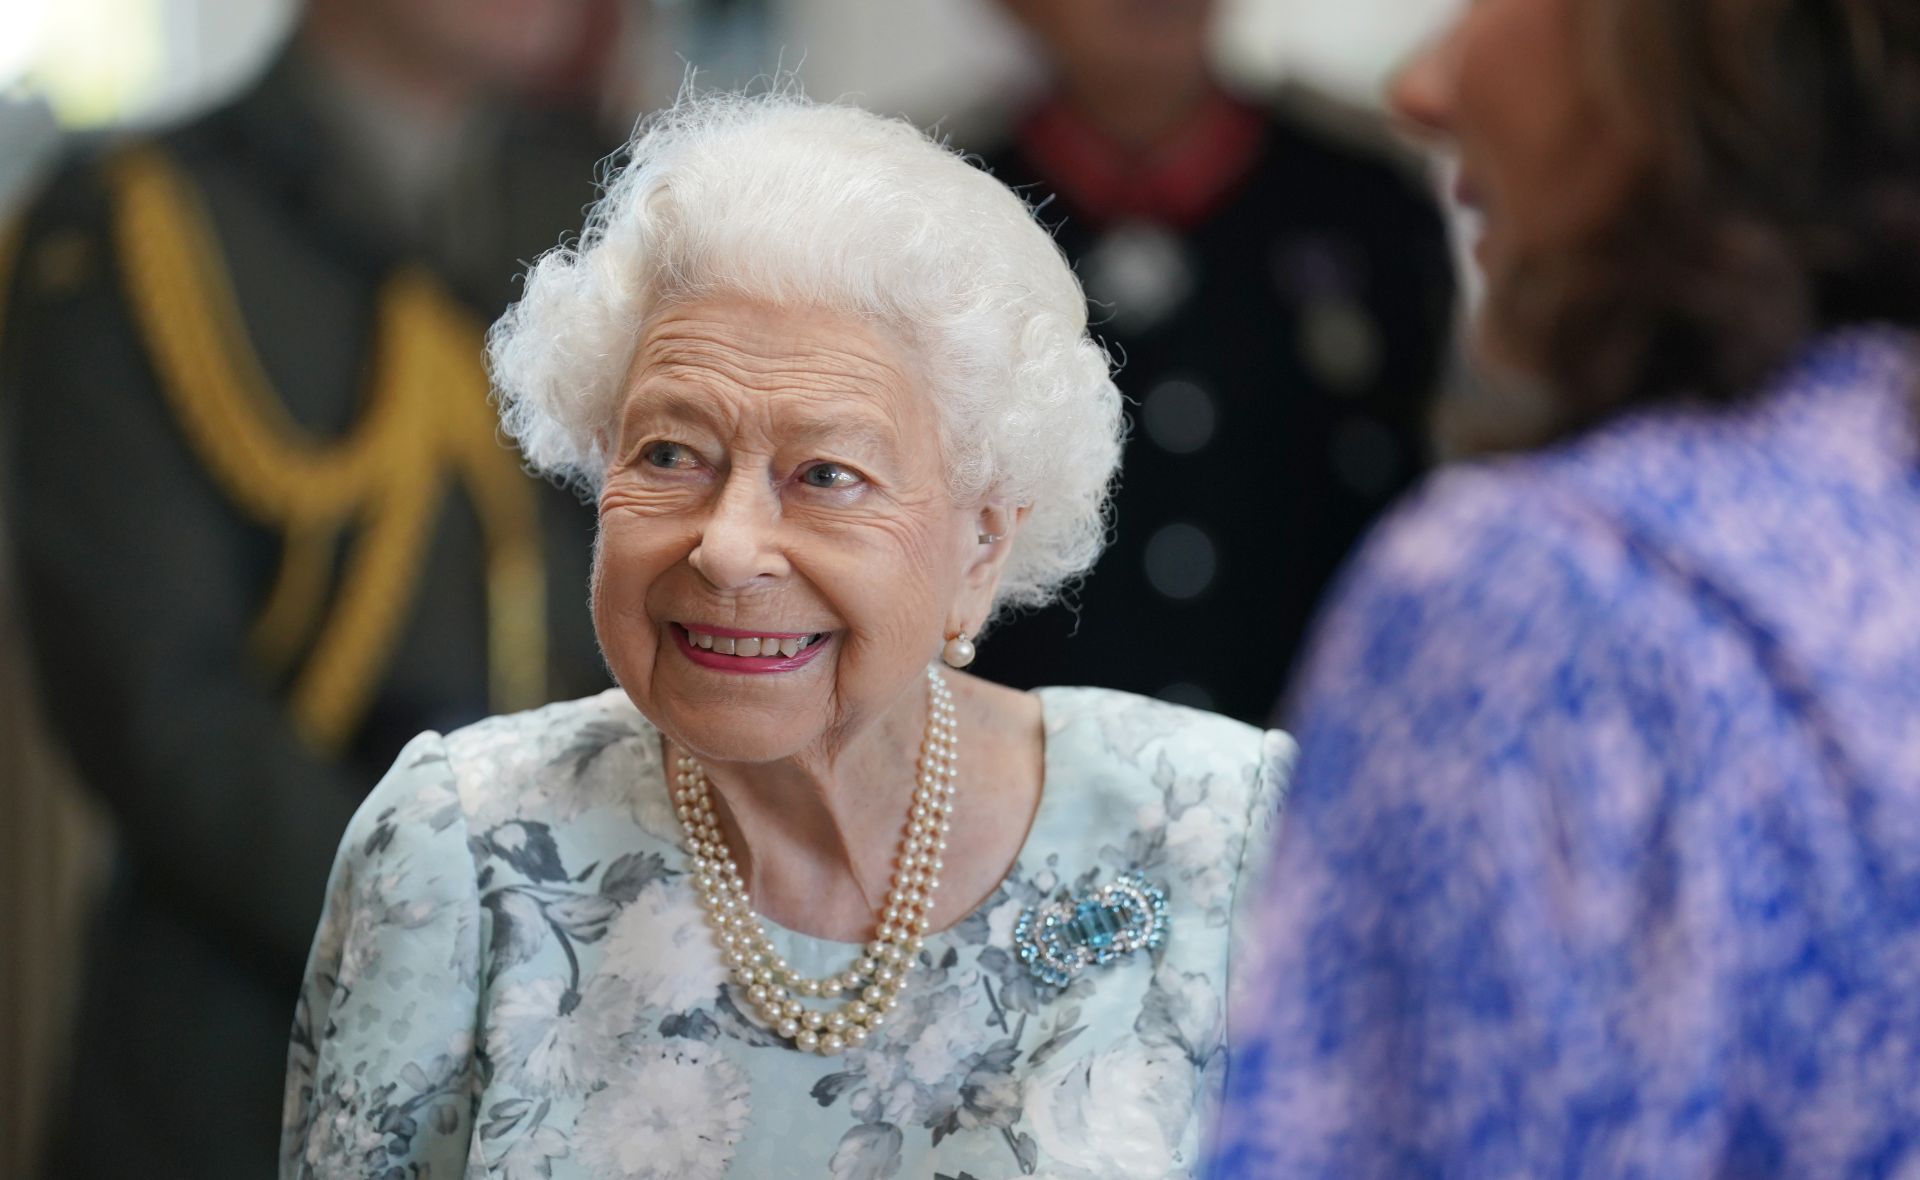 The Queen is told to rest by doctors just one day after her recent public appearance